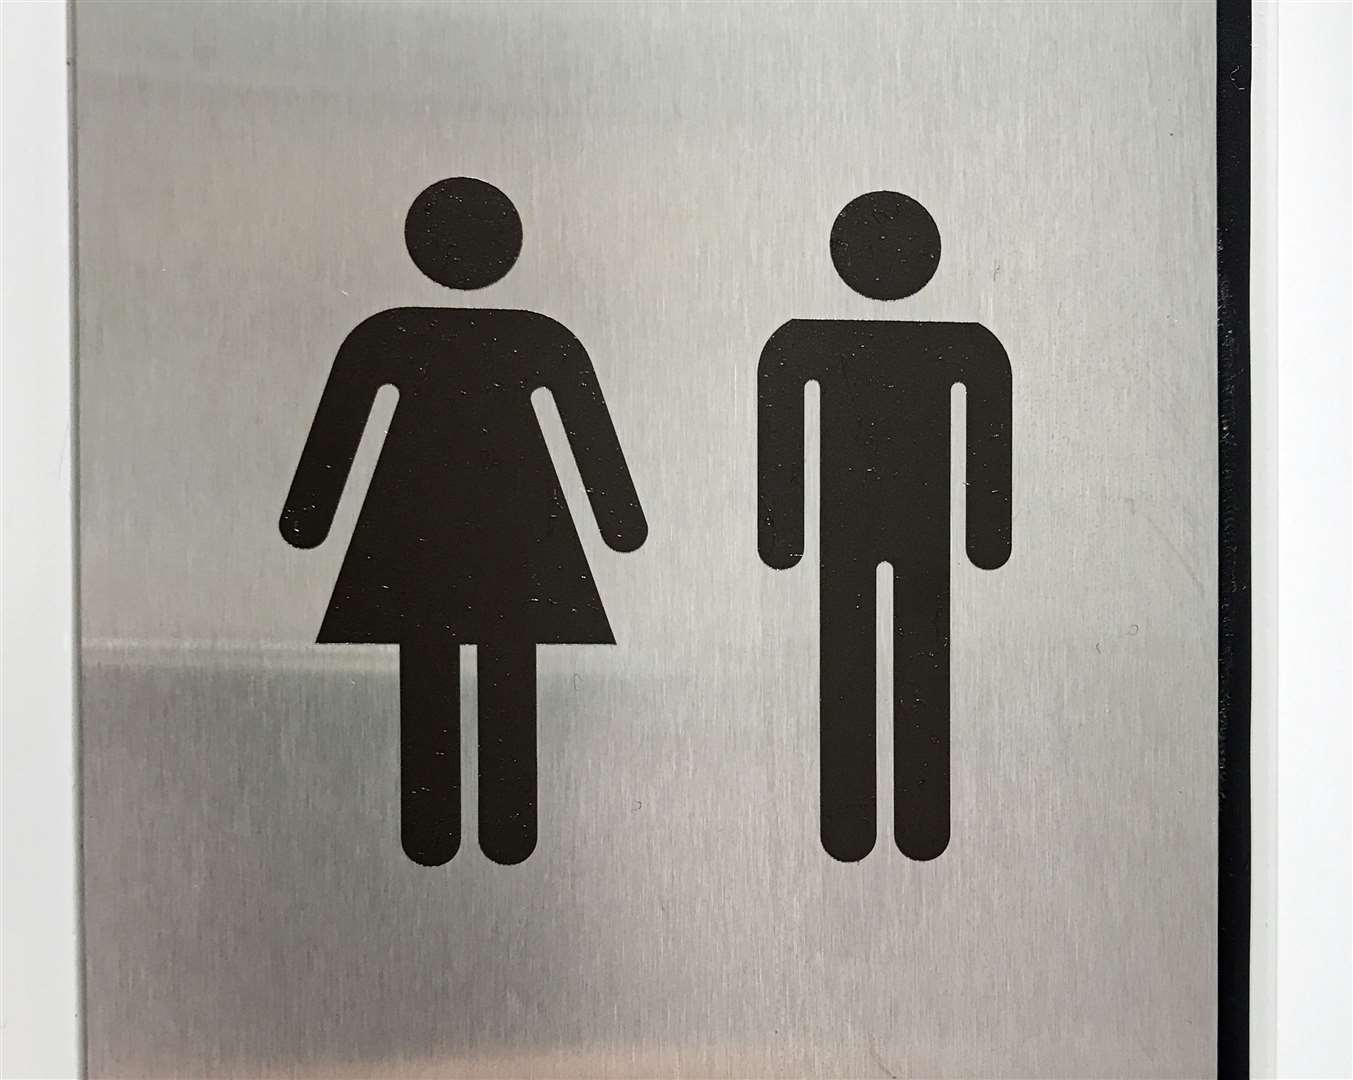 Signage for toilets (Martin Keene/PA)